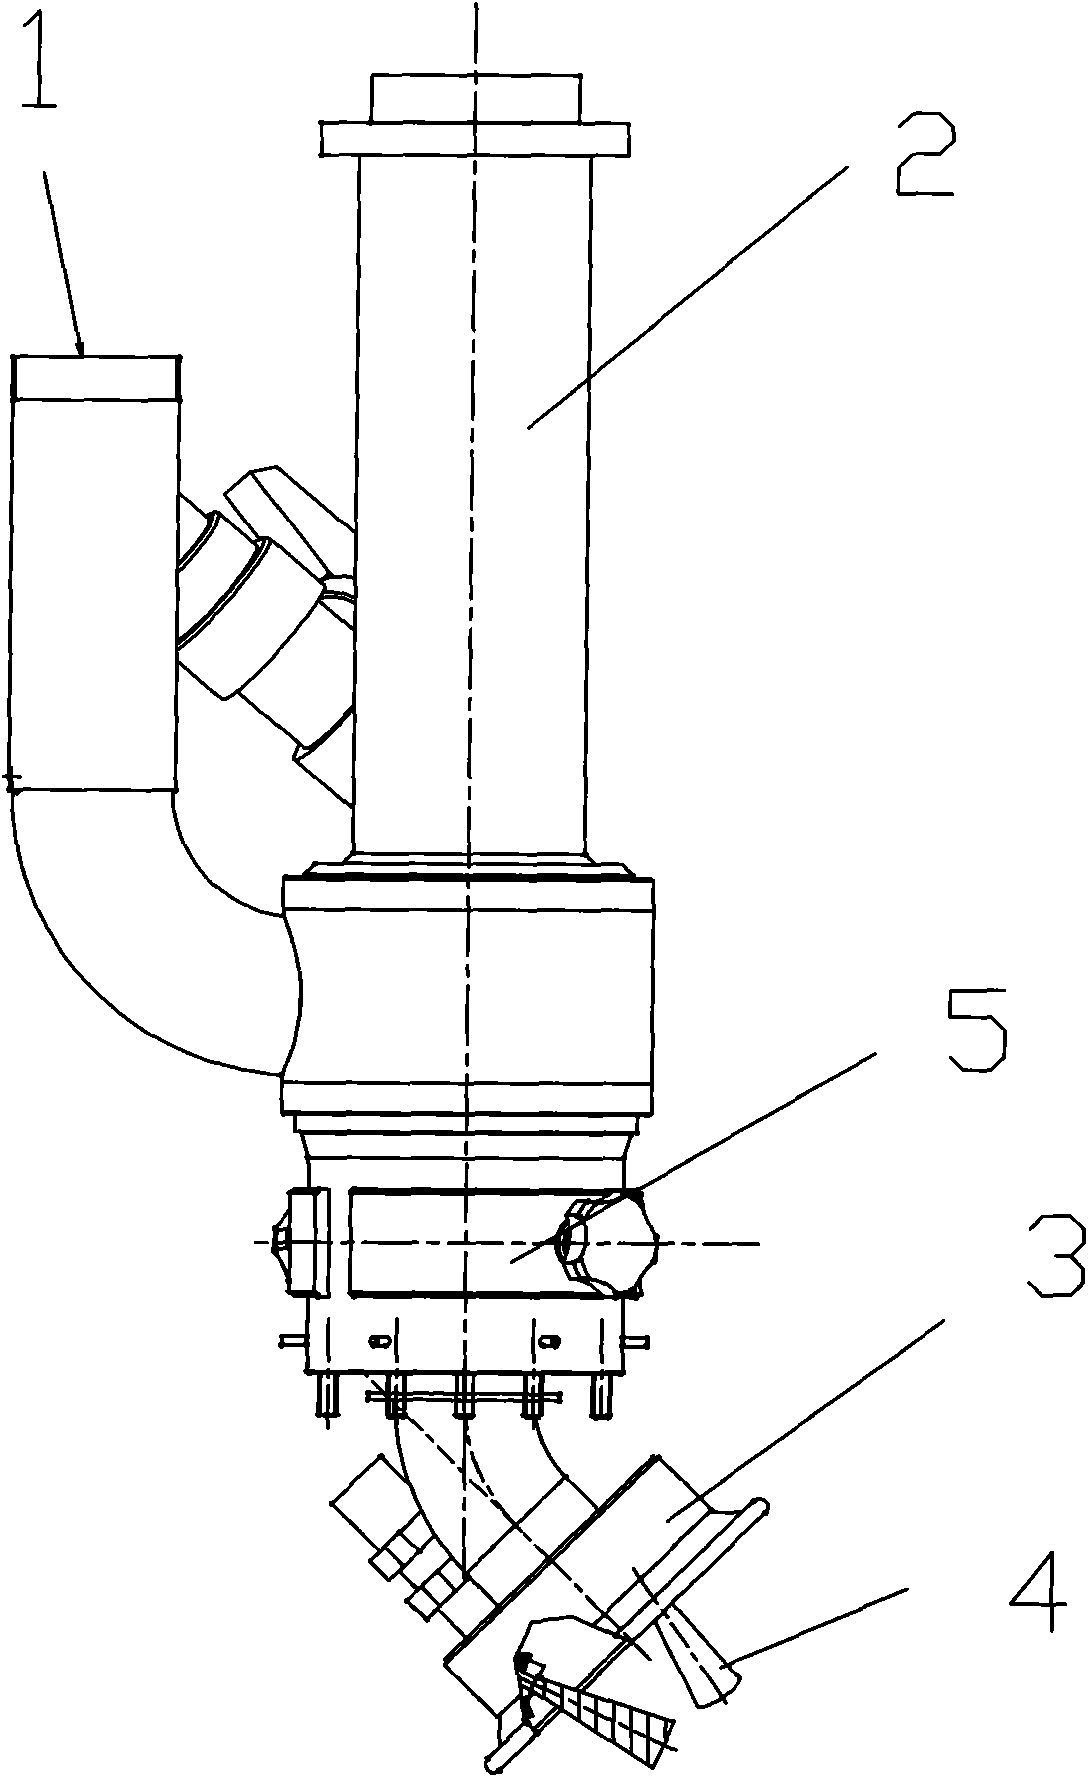 Integrated silt loosening and sucking device for removing silt